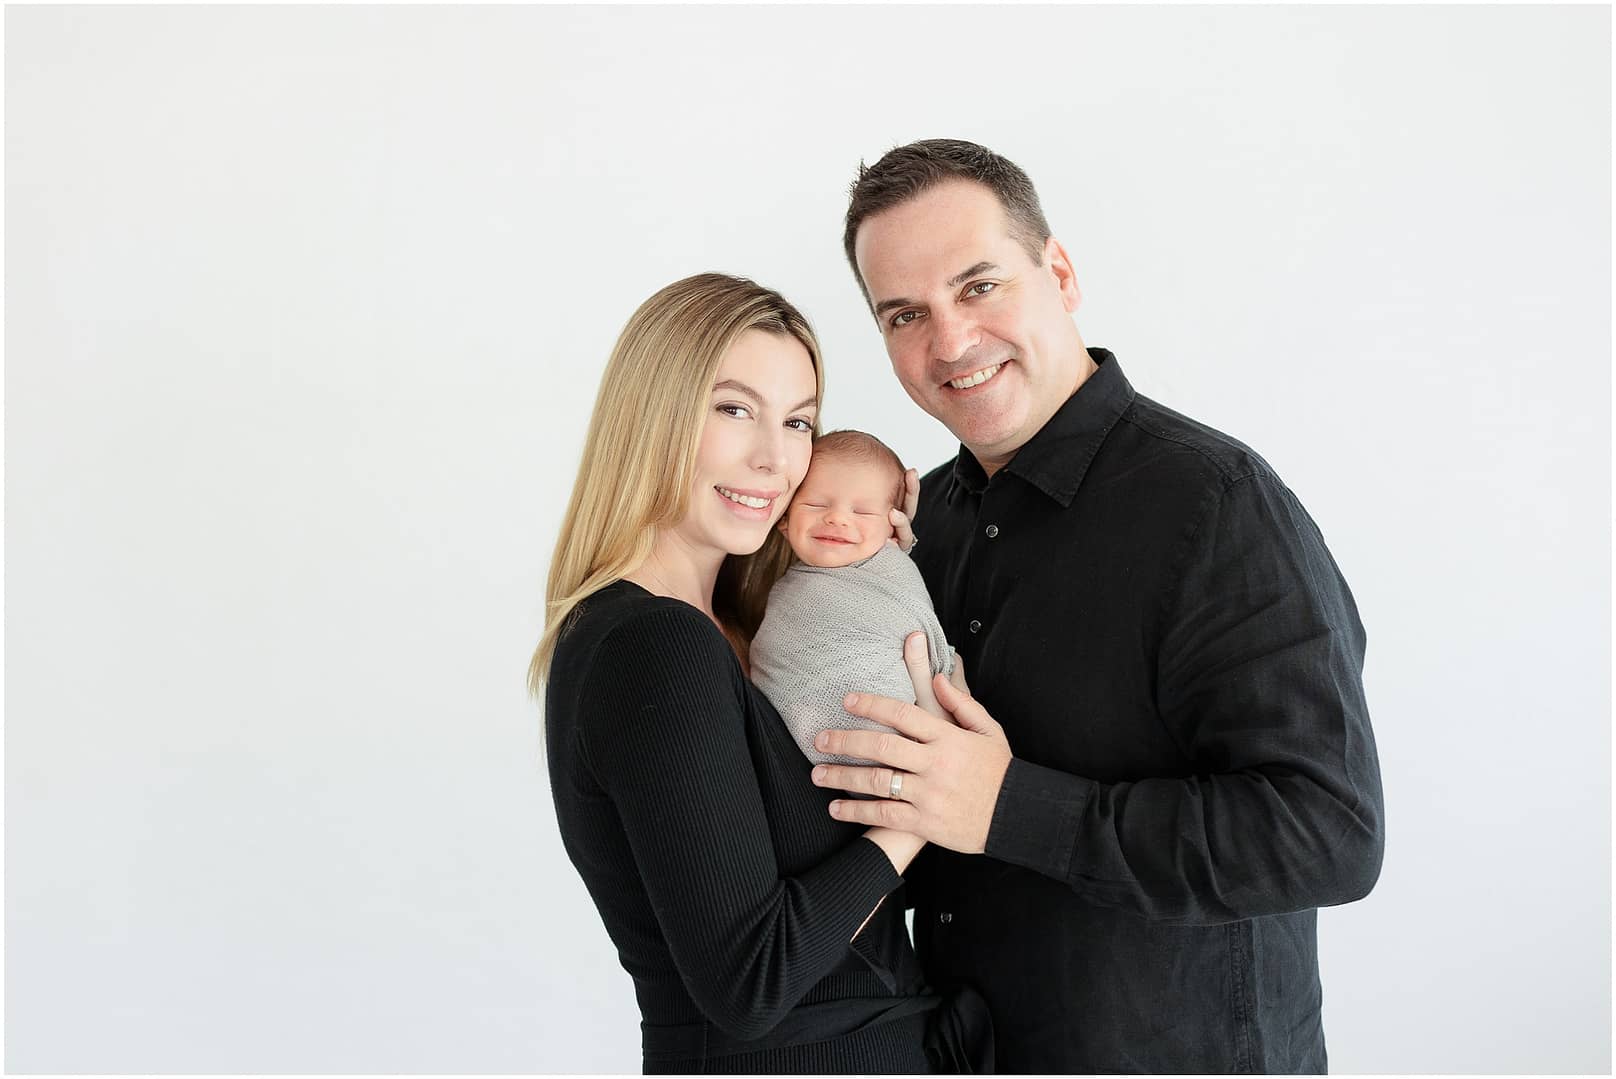 Baby boy smiles with his mom and dad during downtown Boise studio session. Photo by Tiffany Hix Photography.